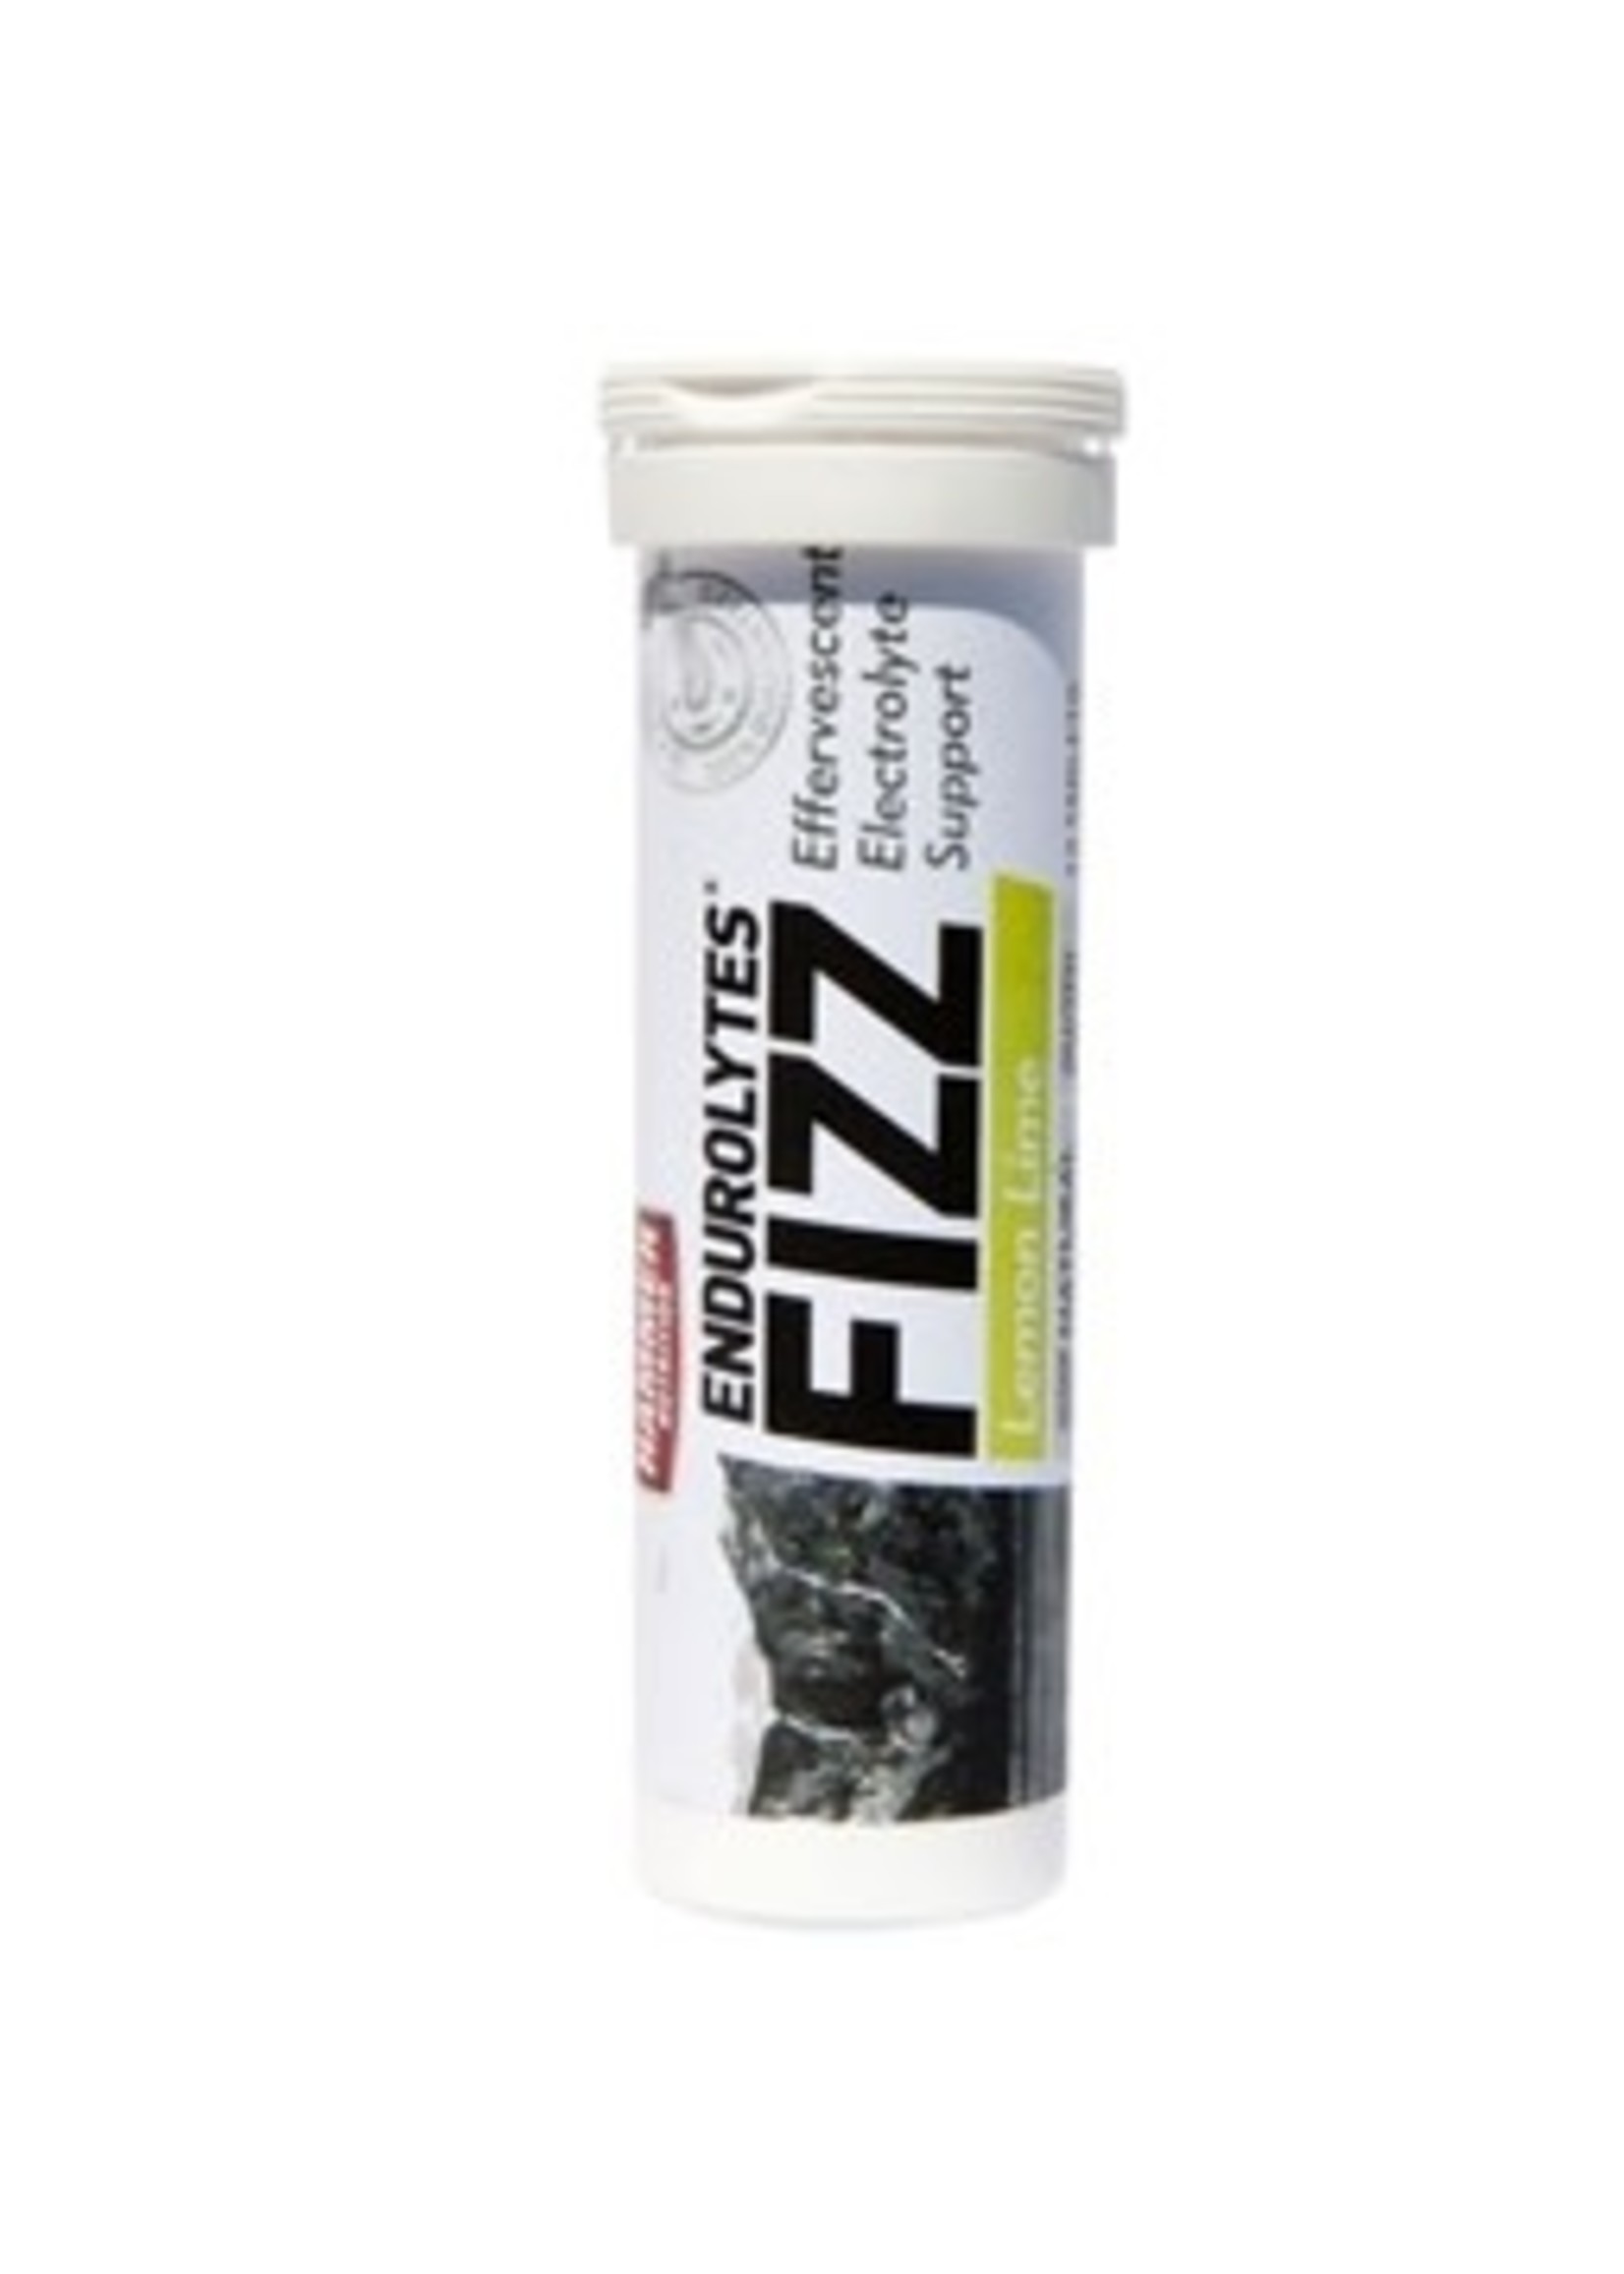 Hammer Nutrition Hammer Endurolytles Fizz Tablets-Multiple Flavors and Sizes